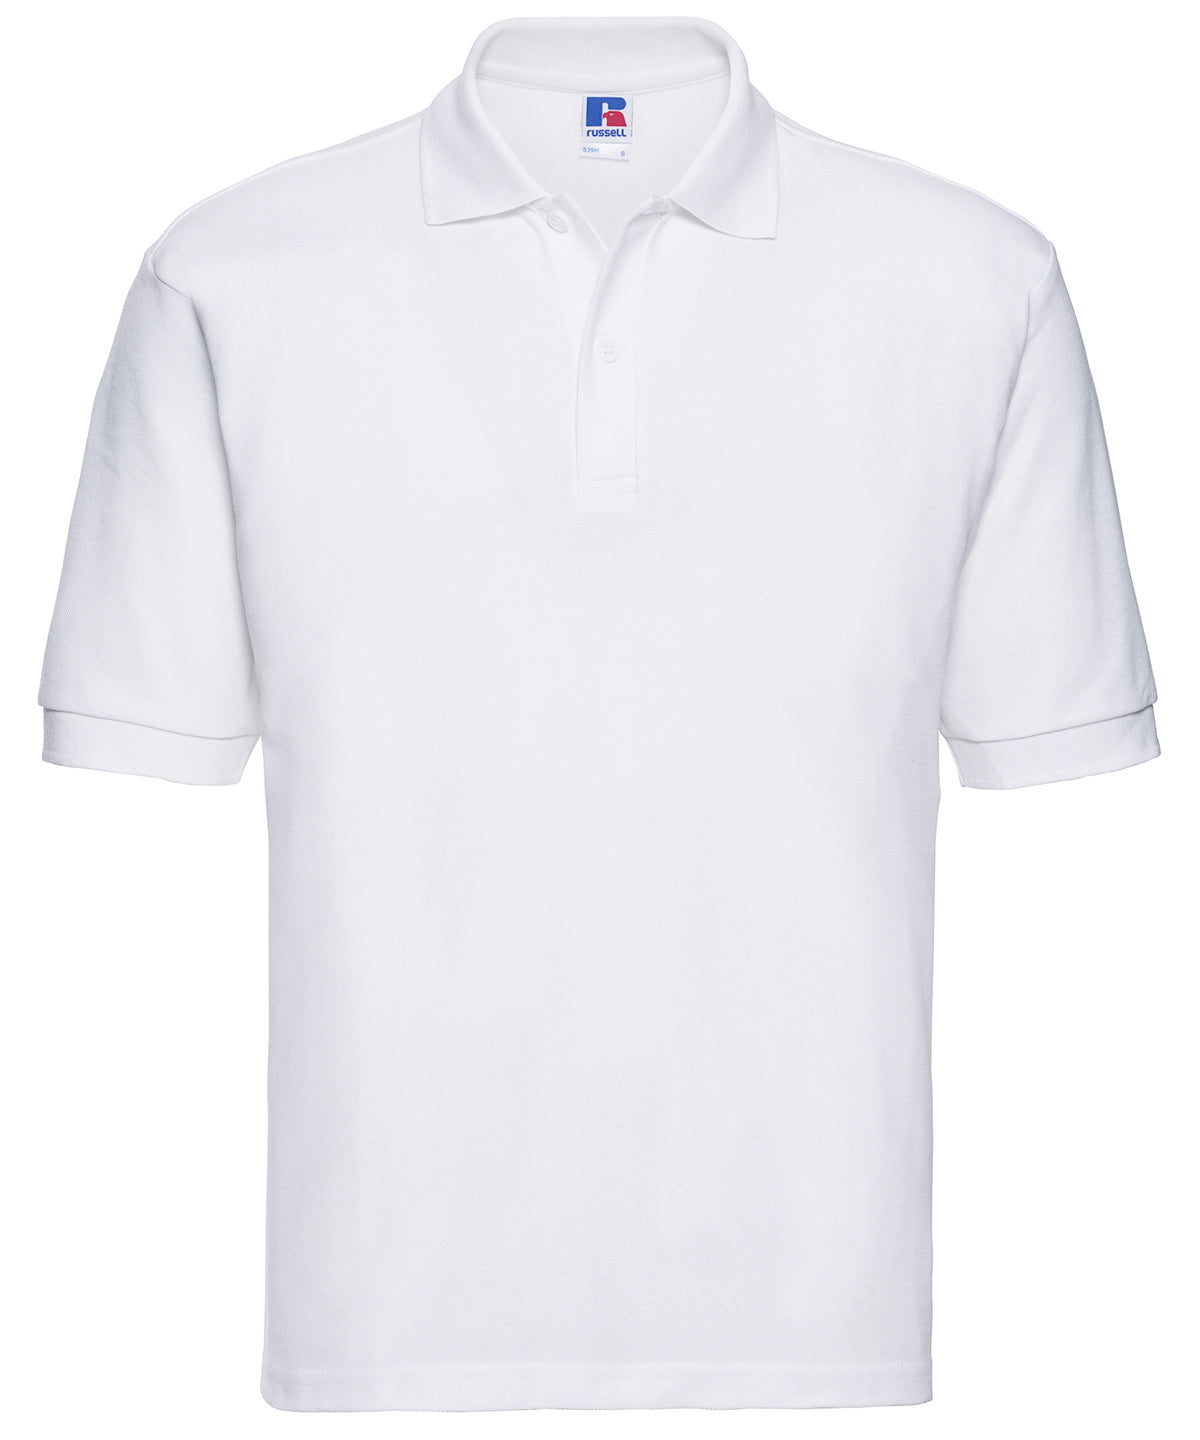 Russell Classic Polycotton Polo White